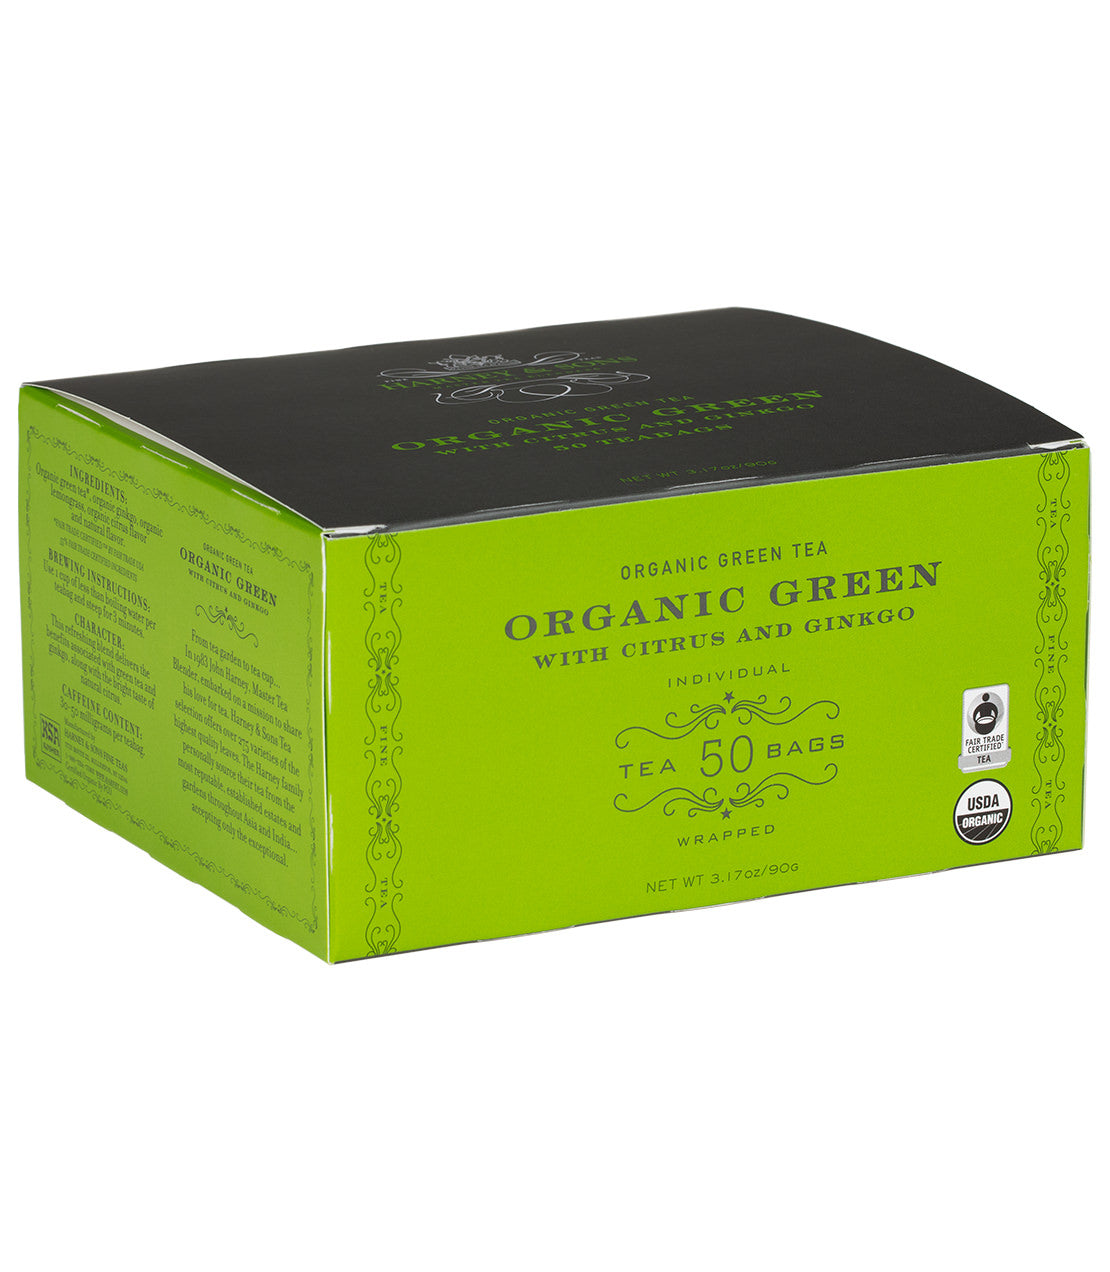 Organic Green with Citrus & Ginkgo - Teabags 50 CT Foil Wrapped Teabags - Harney & Sons Fine Teas